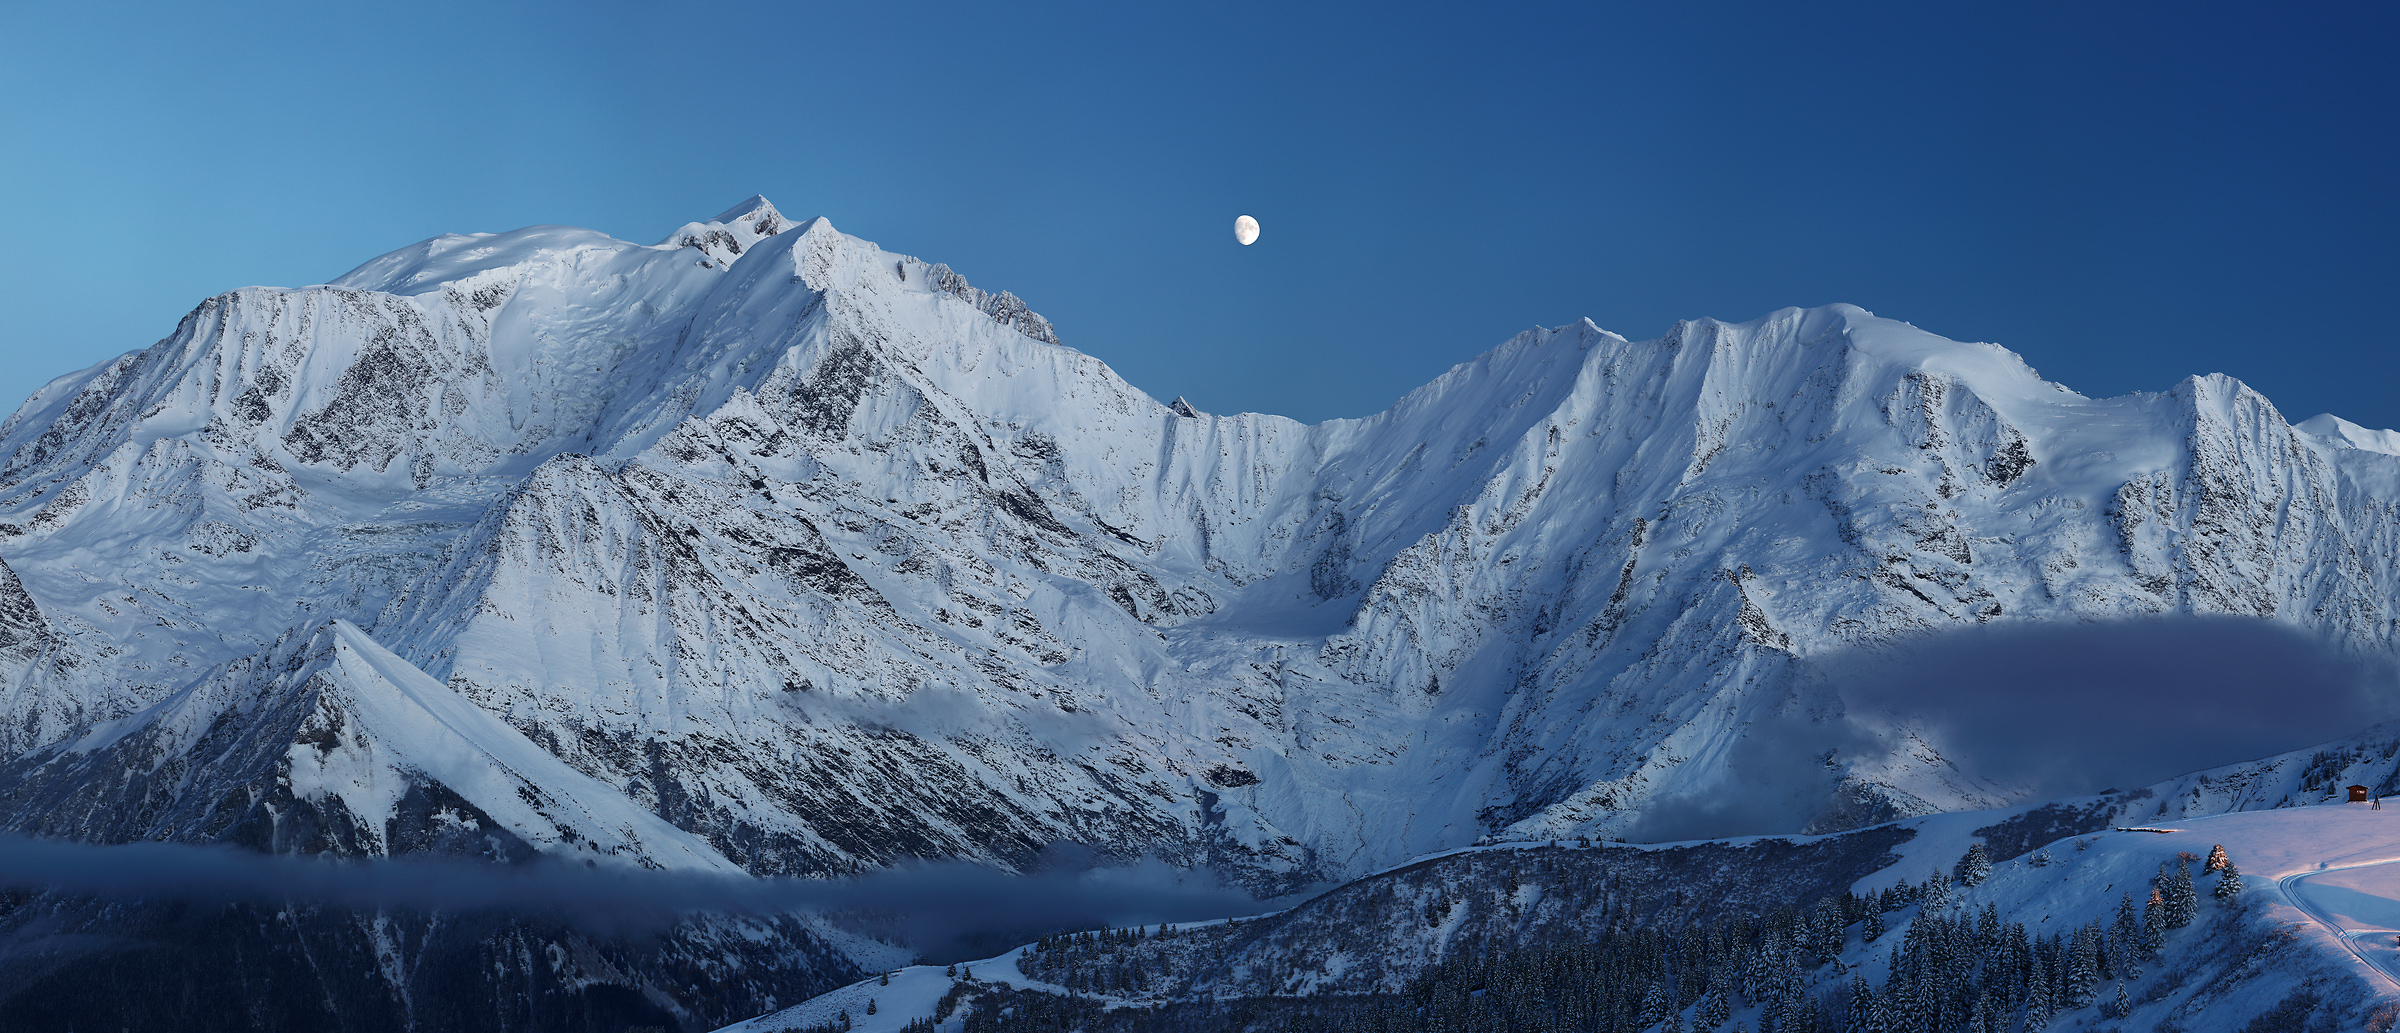 283 megapixels! A very high resolution, large-format VAST photo print of a mountain range at nighttime with the moon; landscape photograph created by Alexandre Deschaumes in Mont Blanc Massif, Saint-Gervais-les-Bains, France.